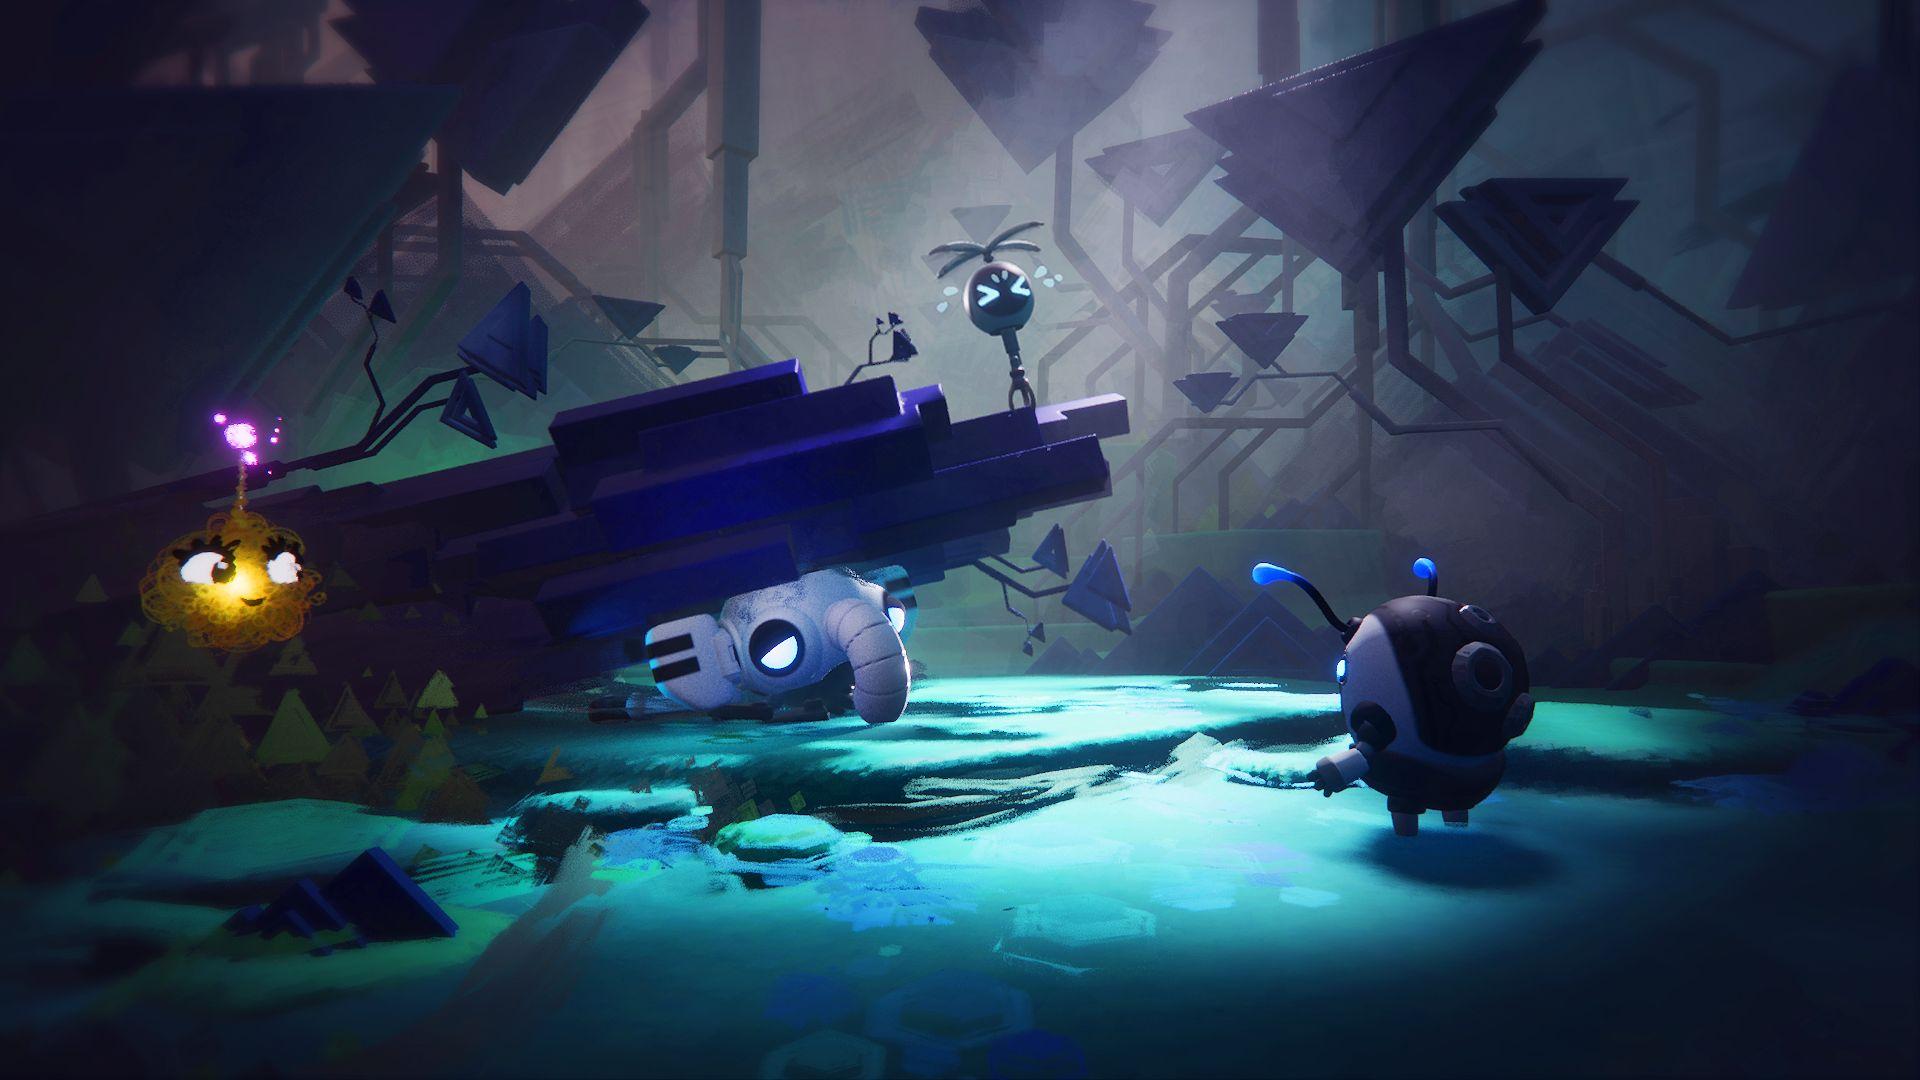 Making games is just the beginning for Media Molecule's Dreams